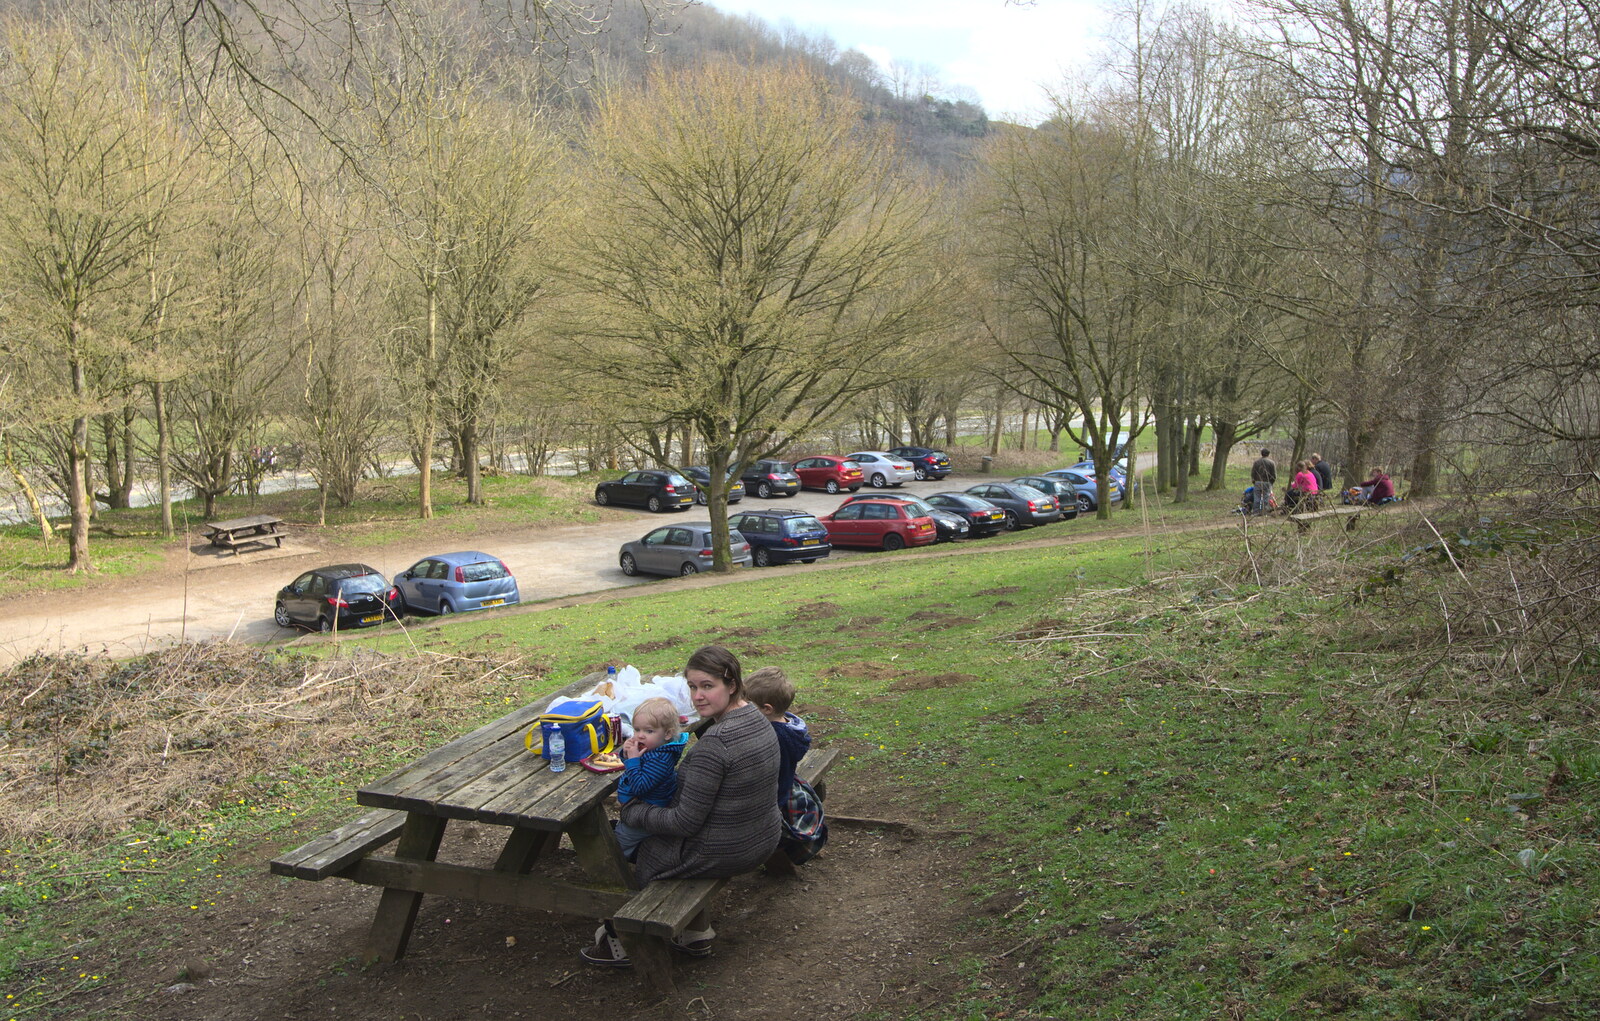 Our picnic by the car park from Chesterfield and the Twisty Spire, Derbyshire - 19th April 2013